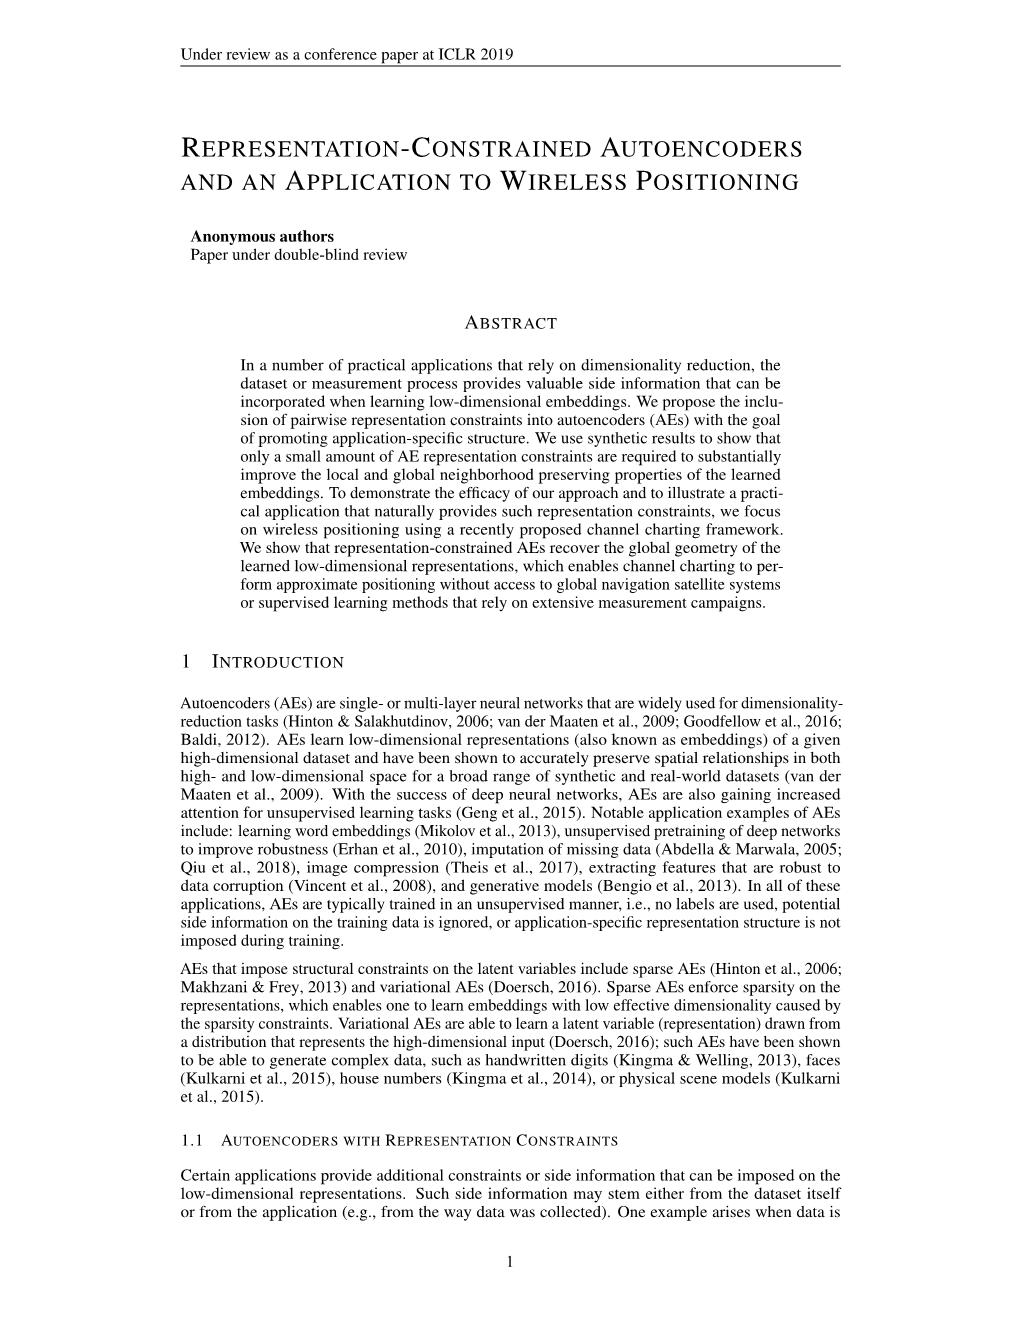 Representation-Constrained Autoencoders and an Application To